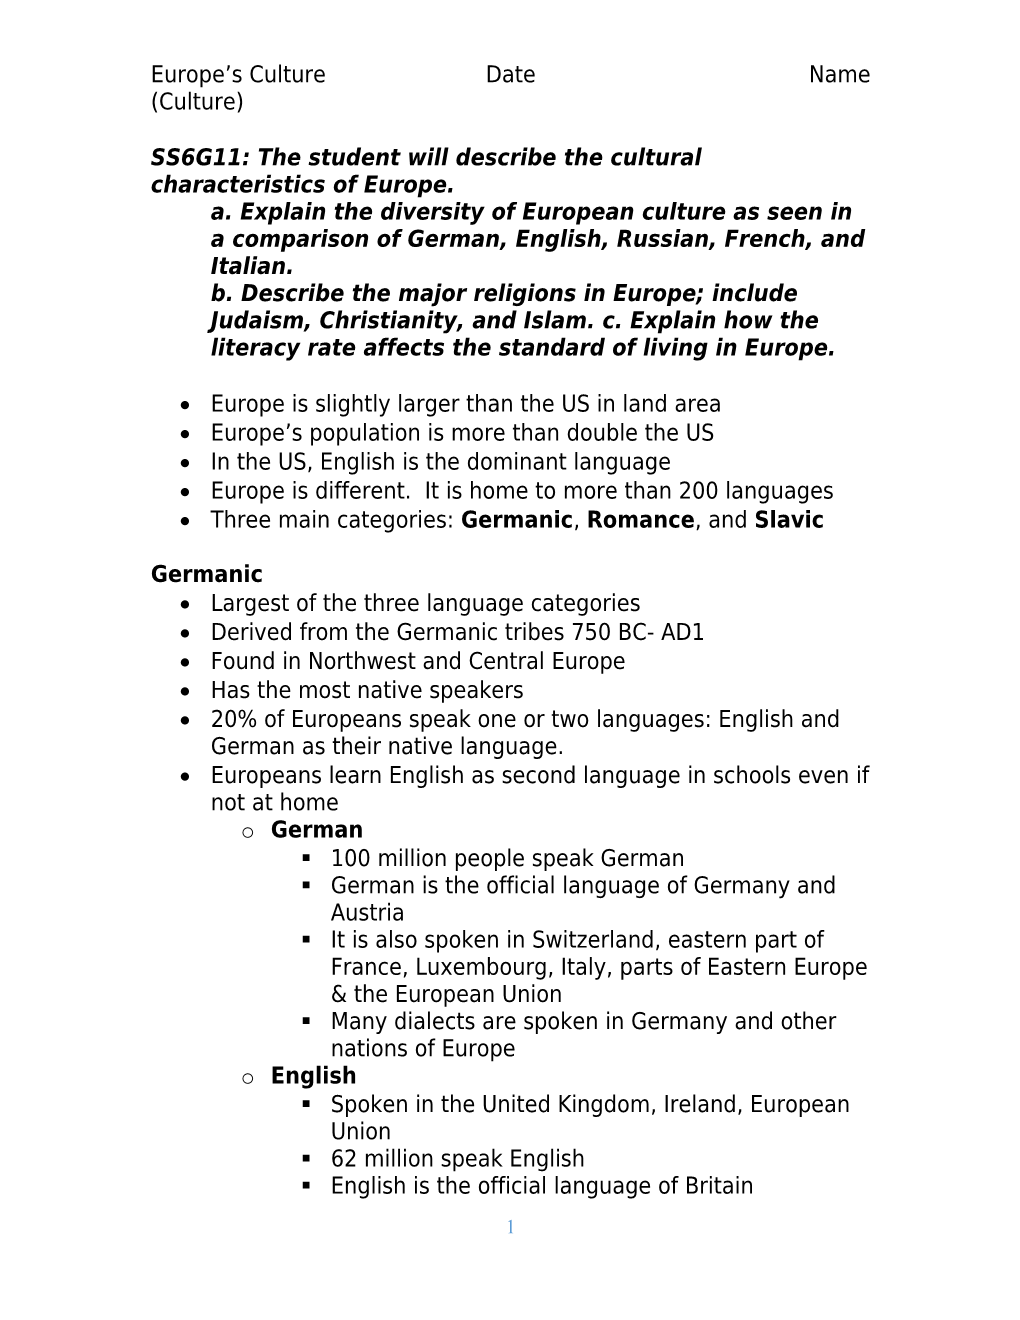 SS6G11: the Student Will Describe the Cultural Characteristics of Europe